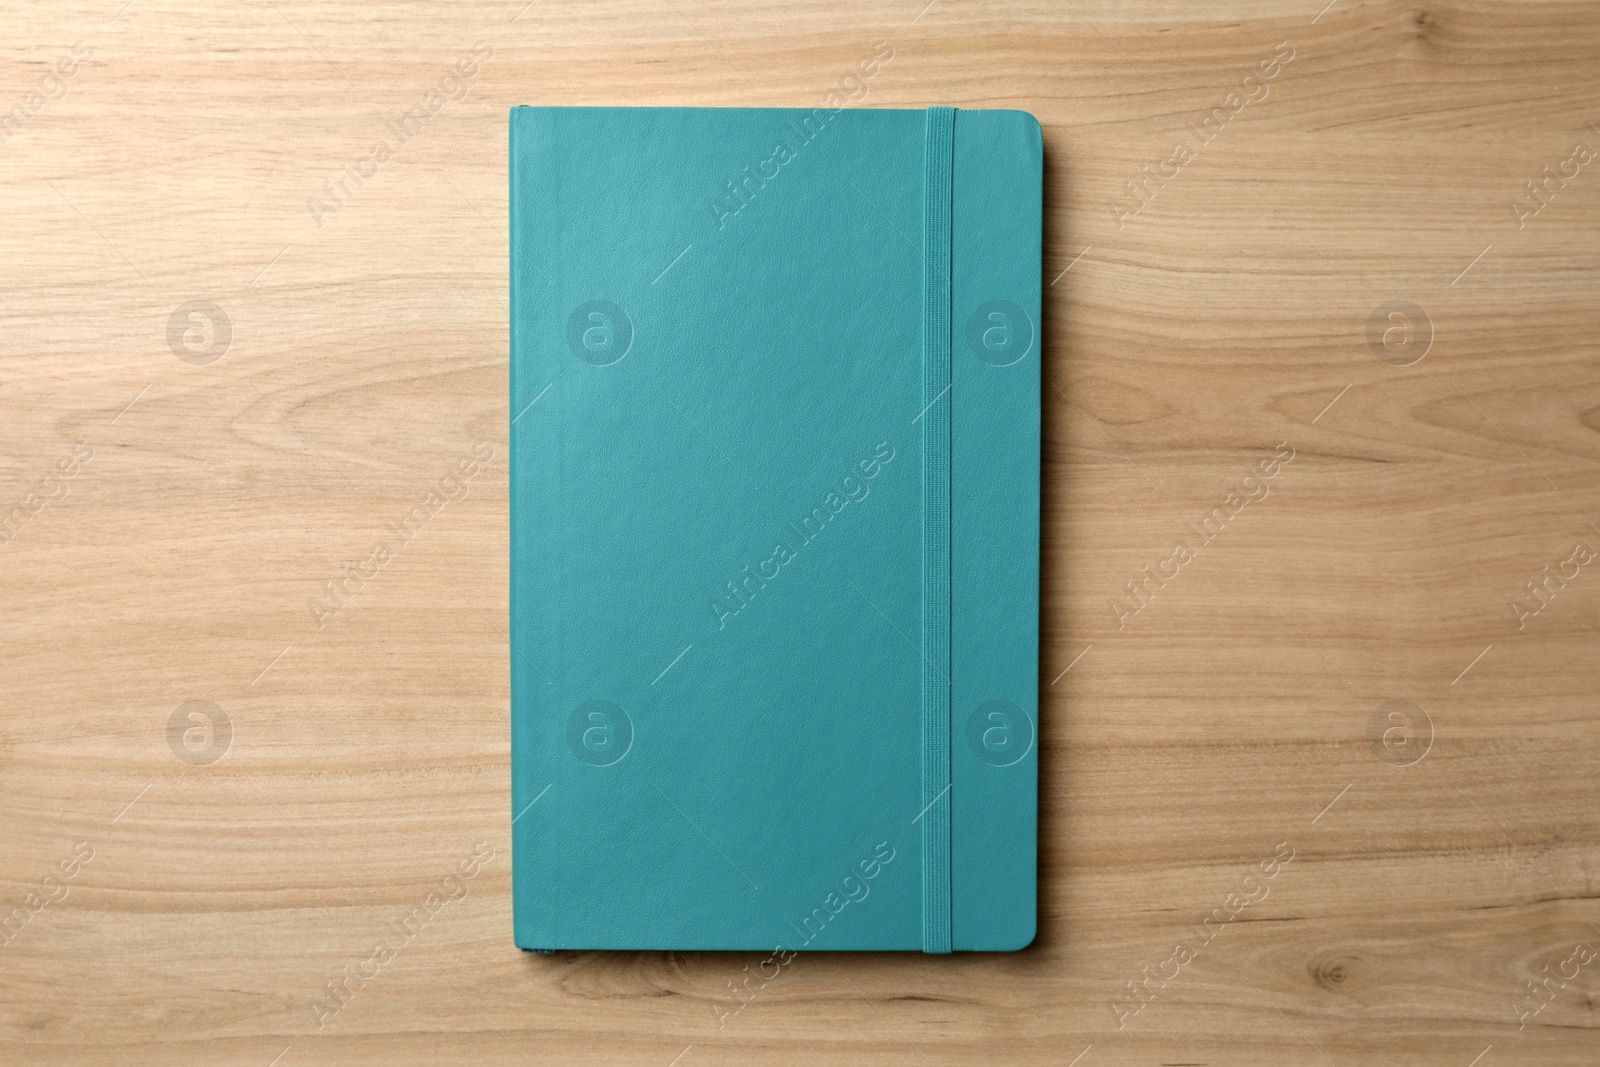 Photo of Turquoise planner on wooden table, top view